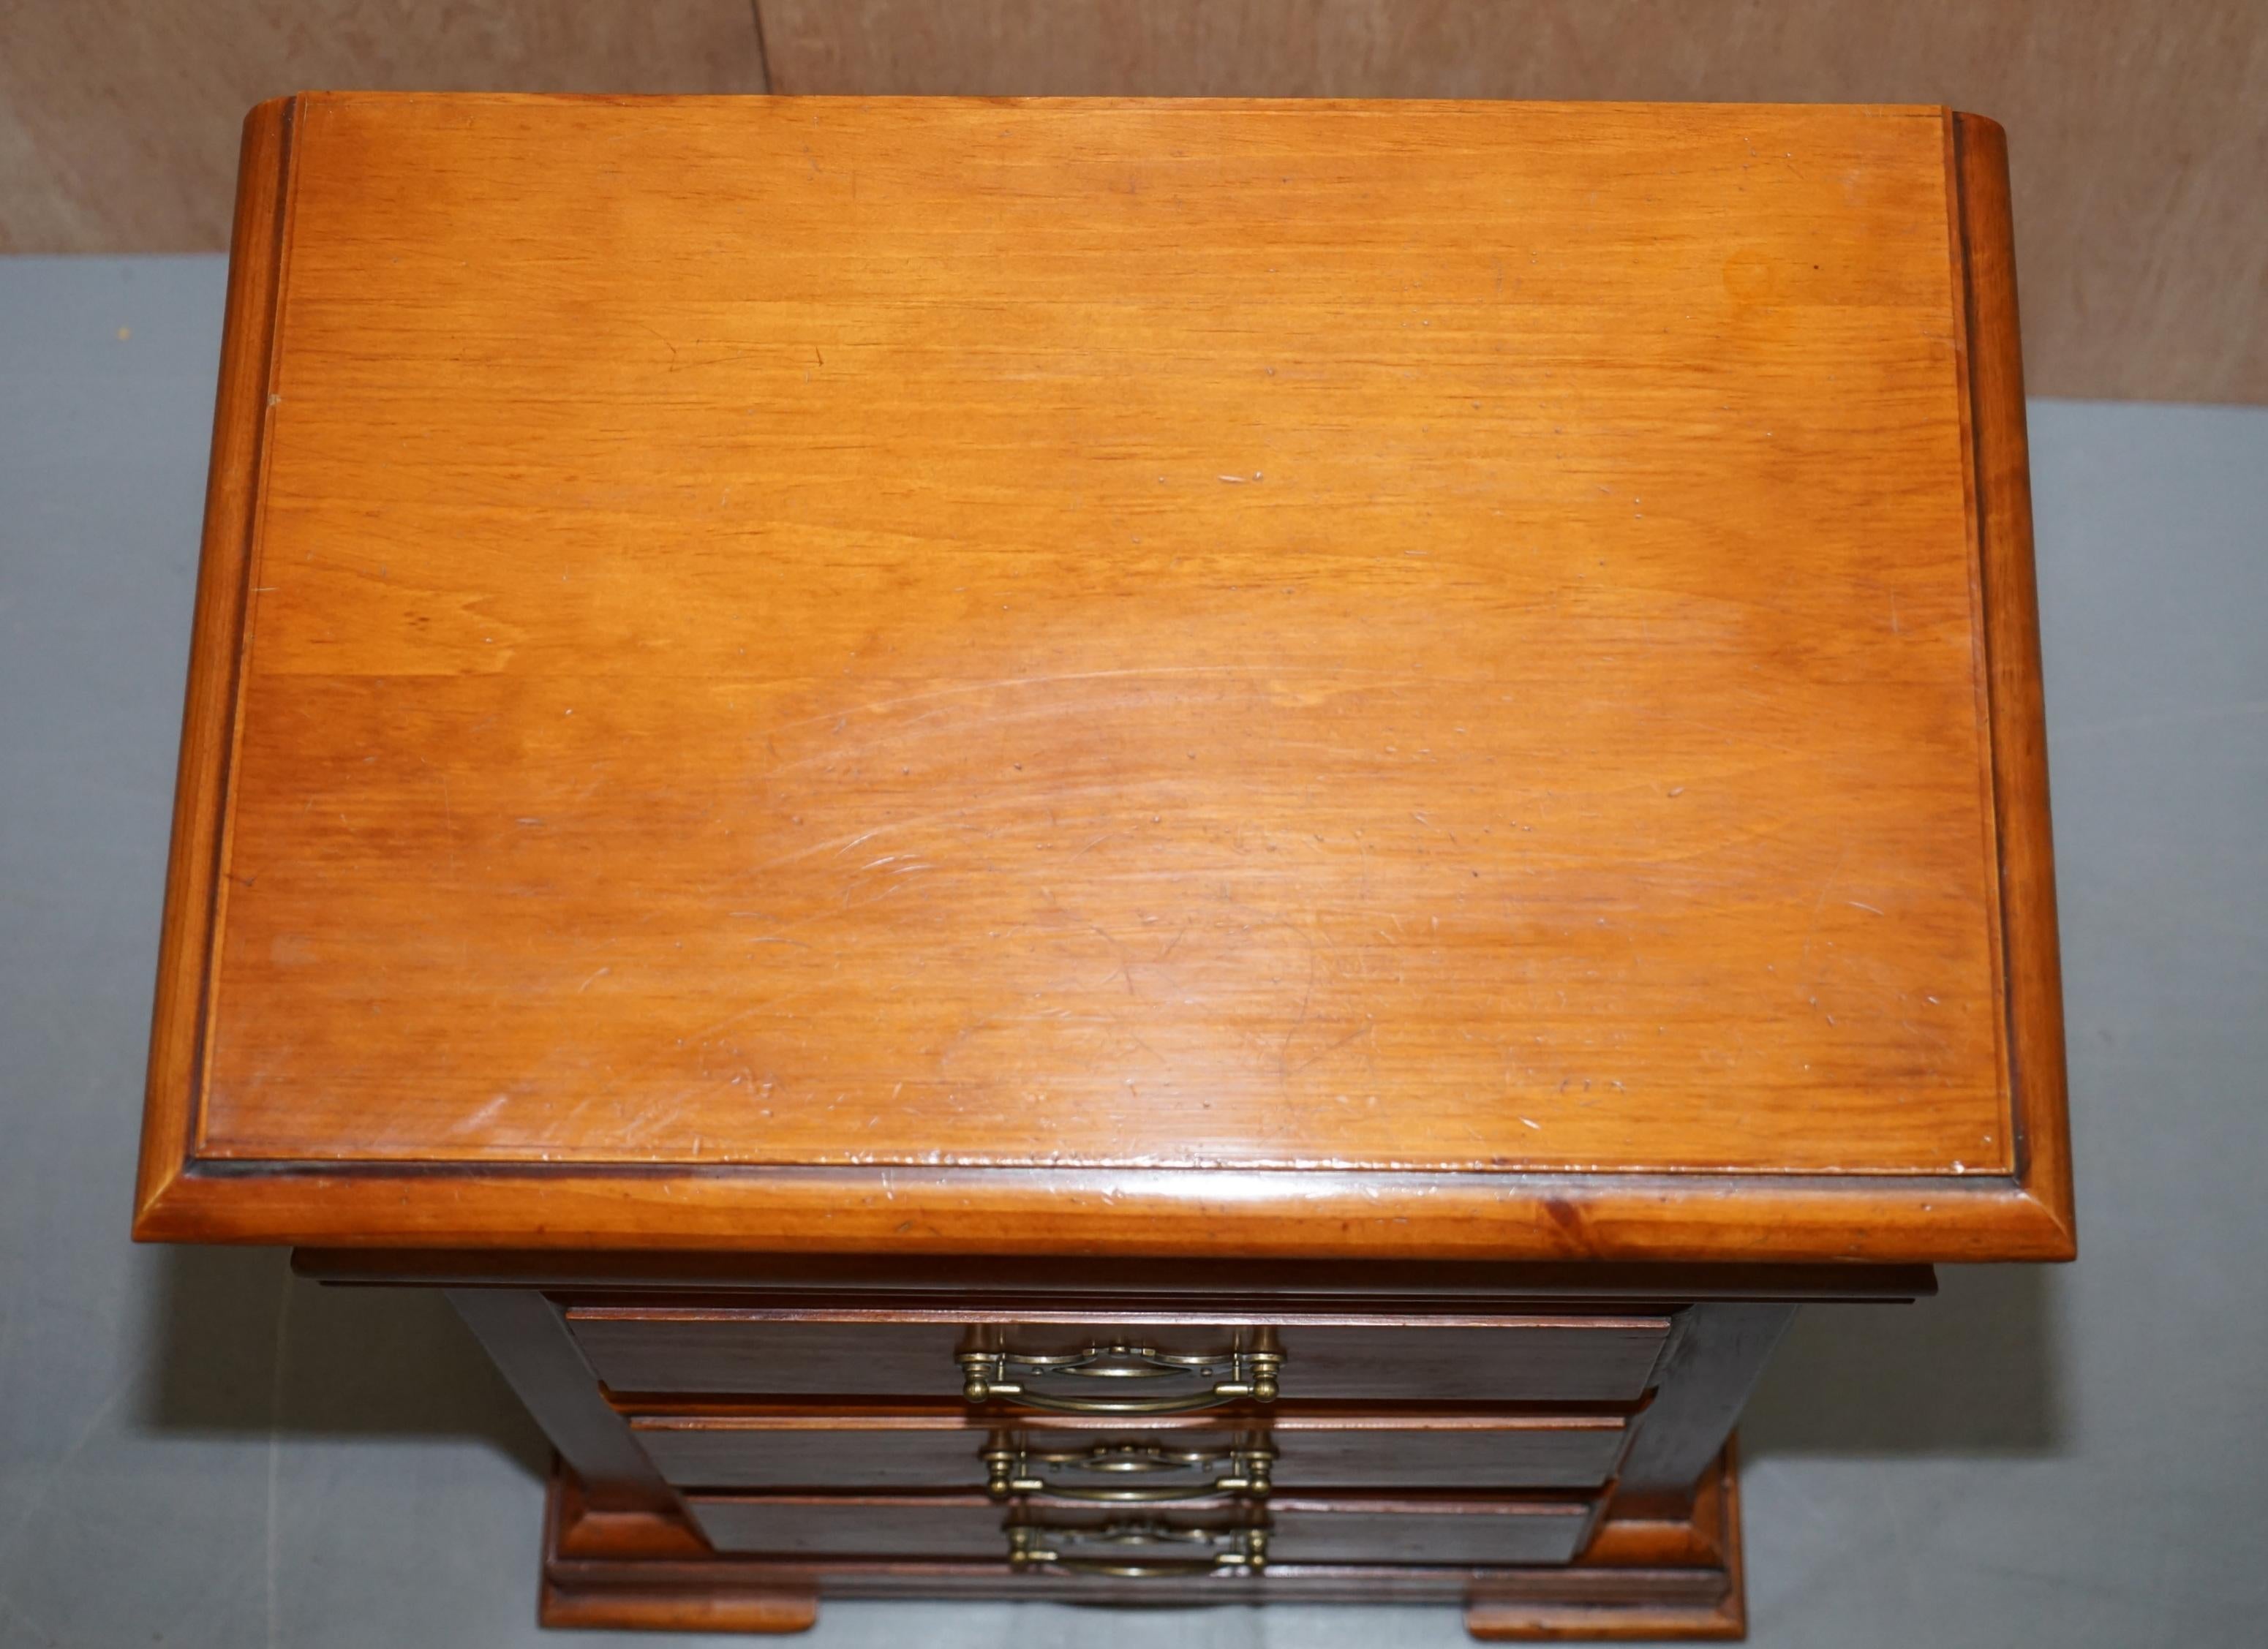 Pair of Bedside Table Drawers with Four Drawers Each, Cherry Color Wood 6